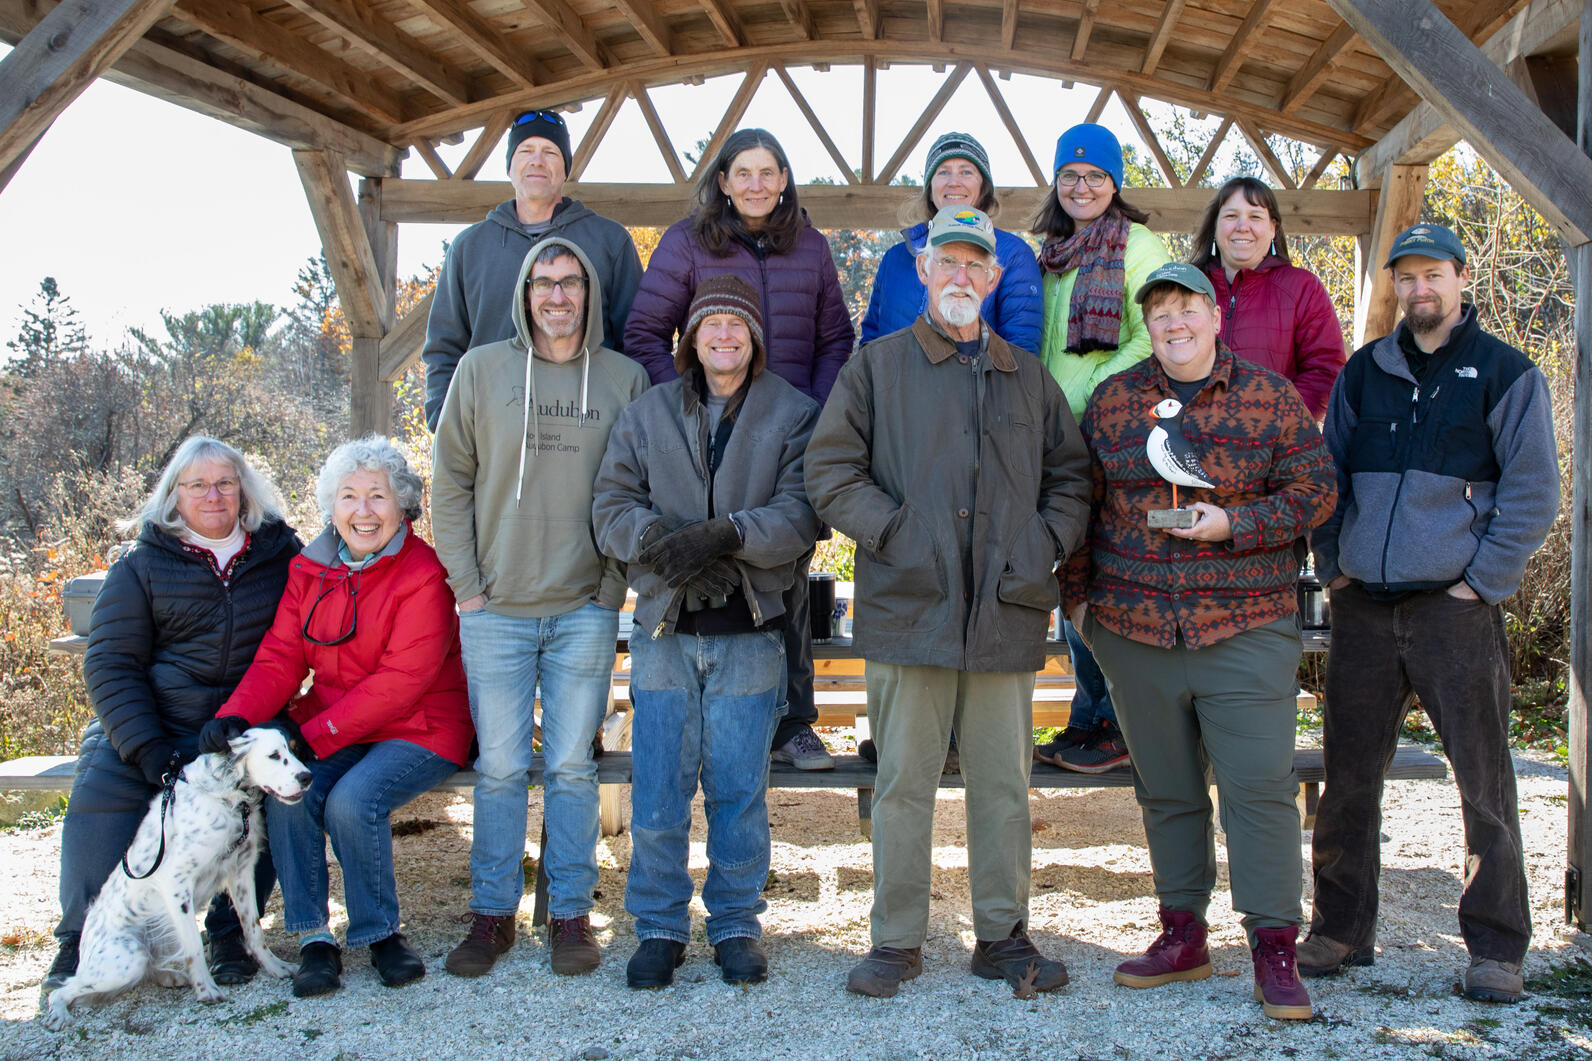 Members of the Seabird Institute staff and Friends of Hog Island